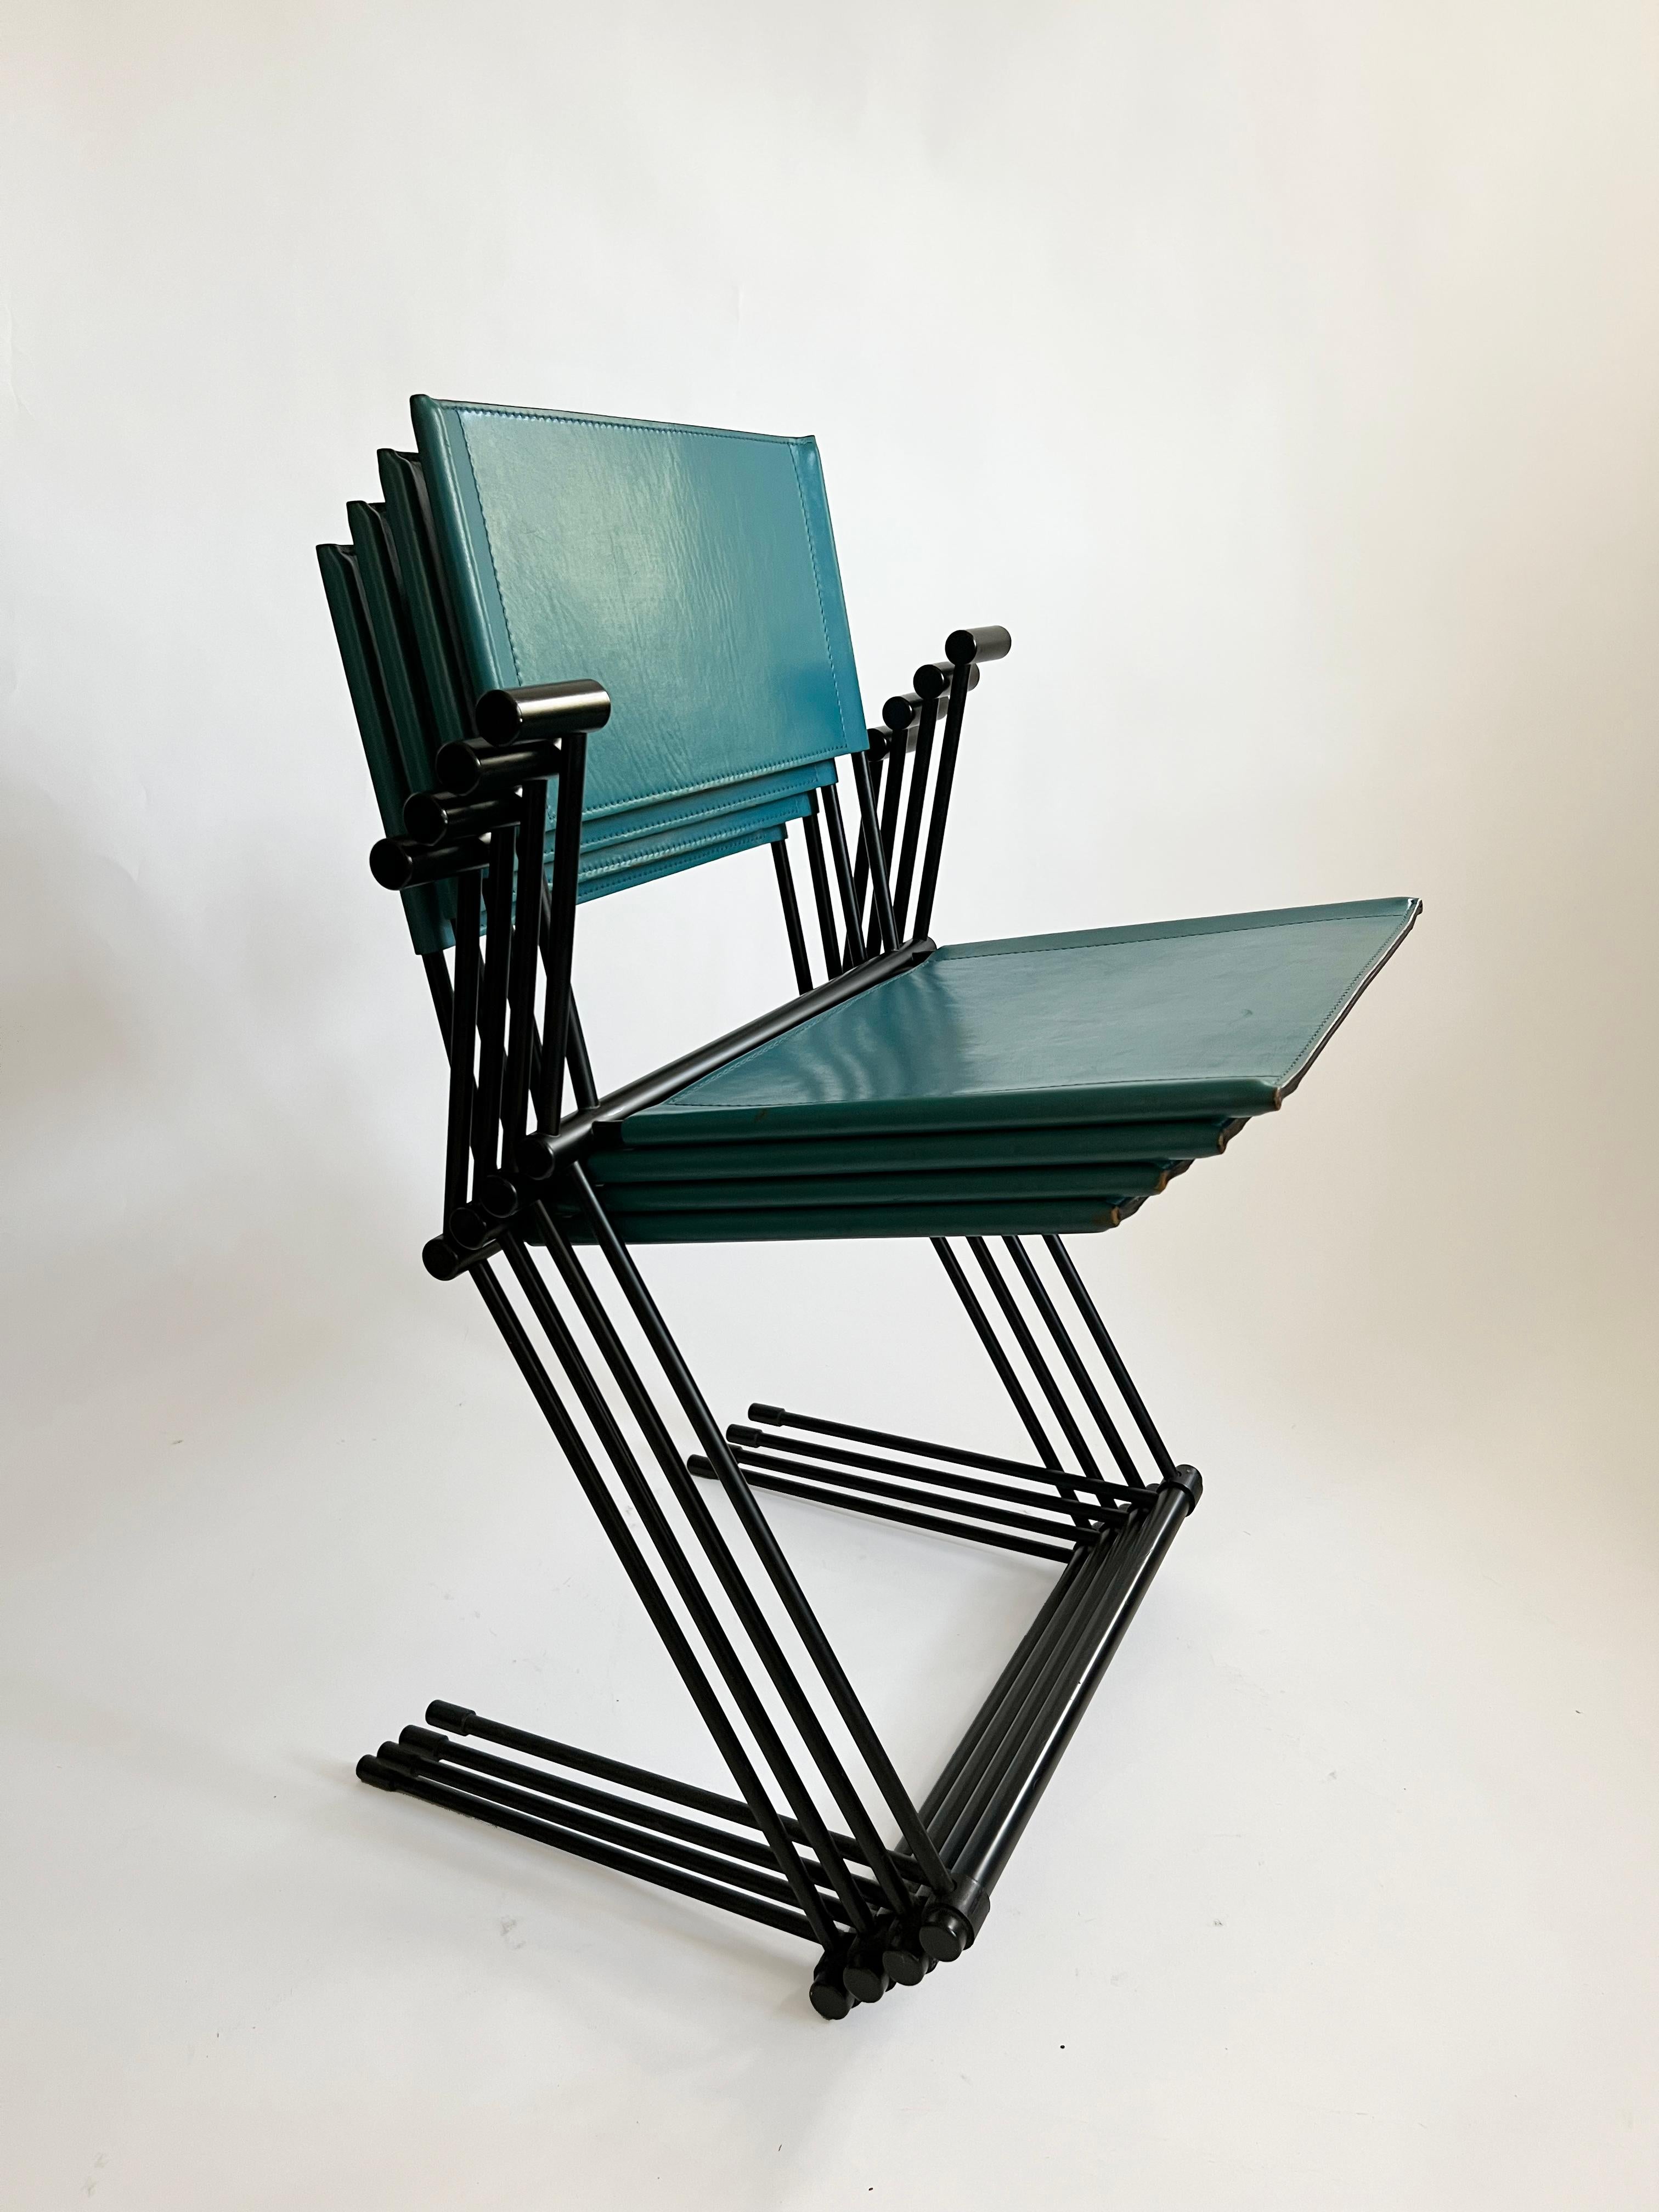 Herbert Ohl designed the ballerina chair in 1991 for Matteo Grassi. These chairs have a black painted metal frame and a blue saddle leather cover with a greenish touch. They are comfortable to sit and perfectly balanced. The chairs show slight signs